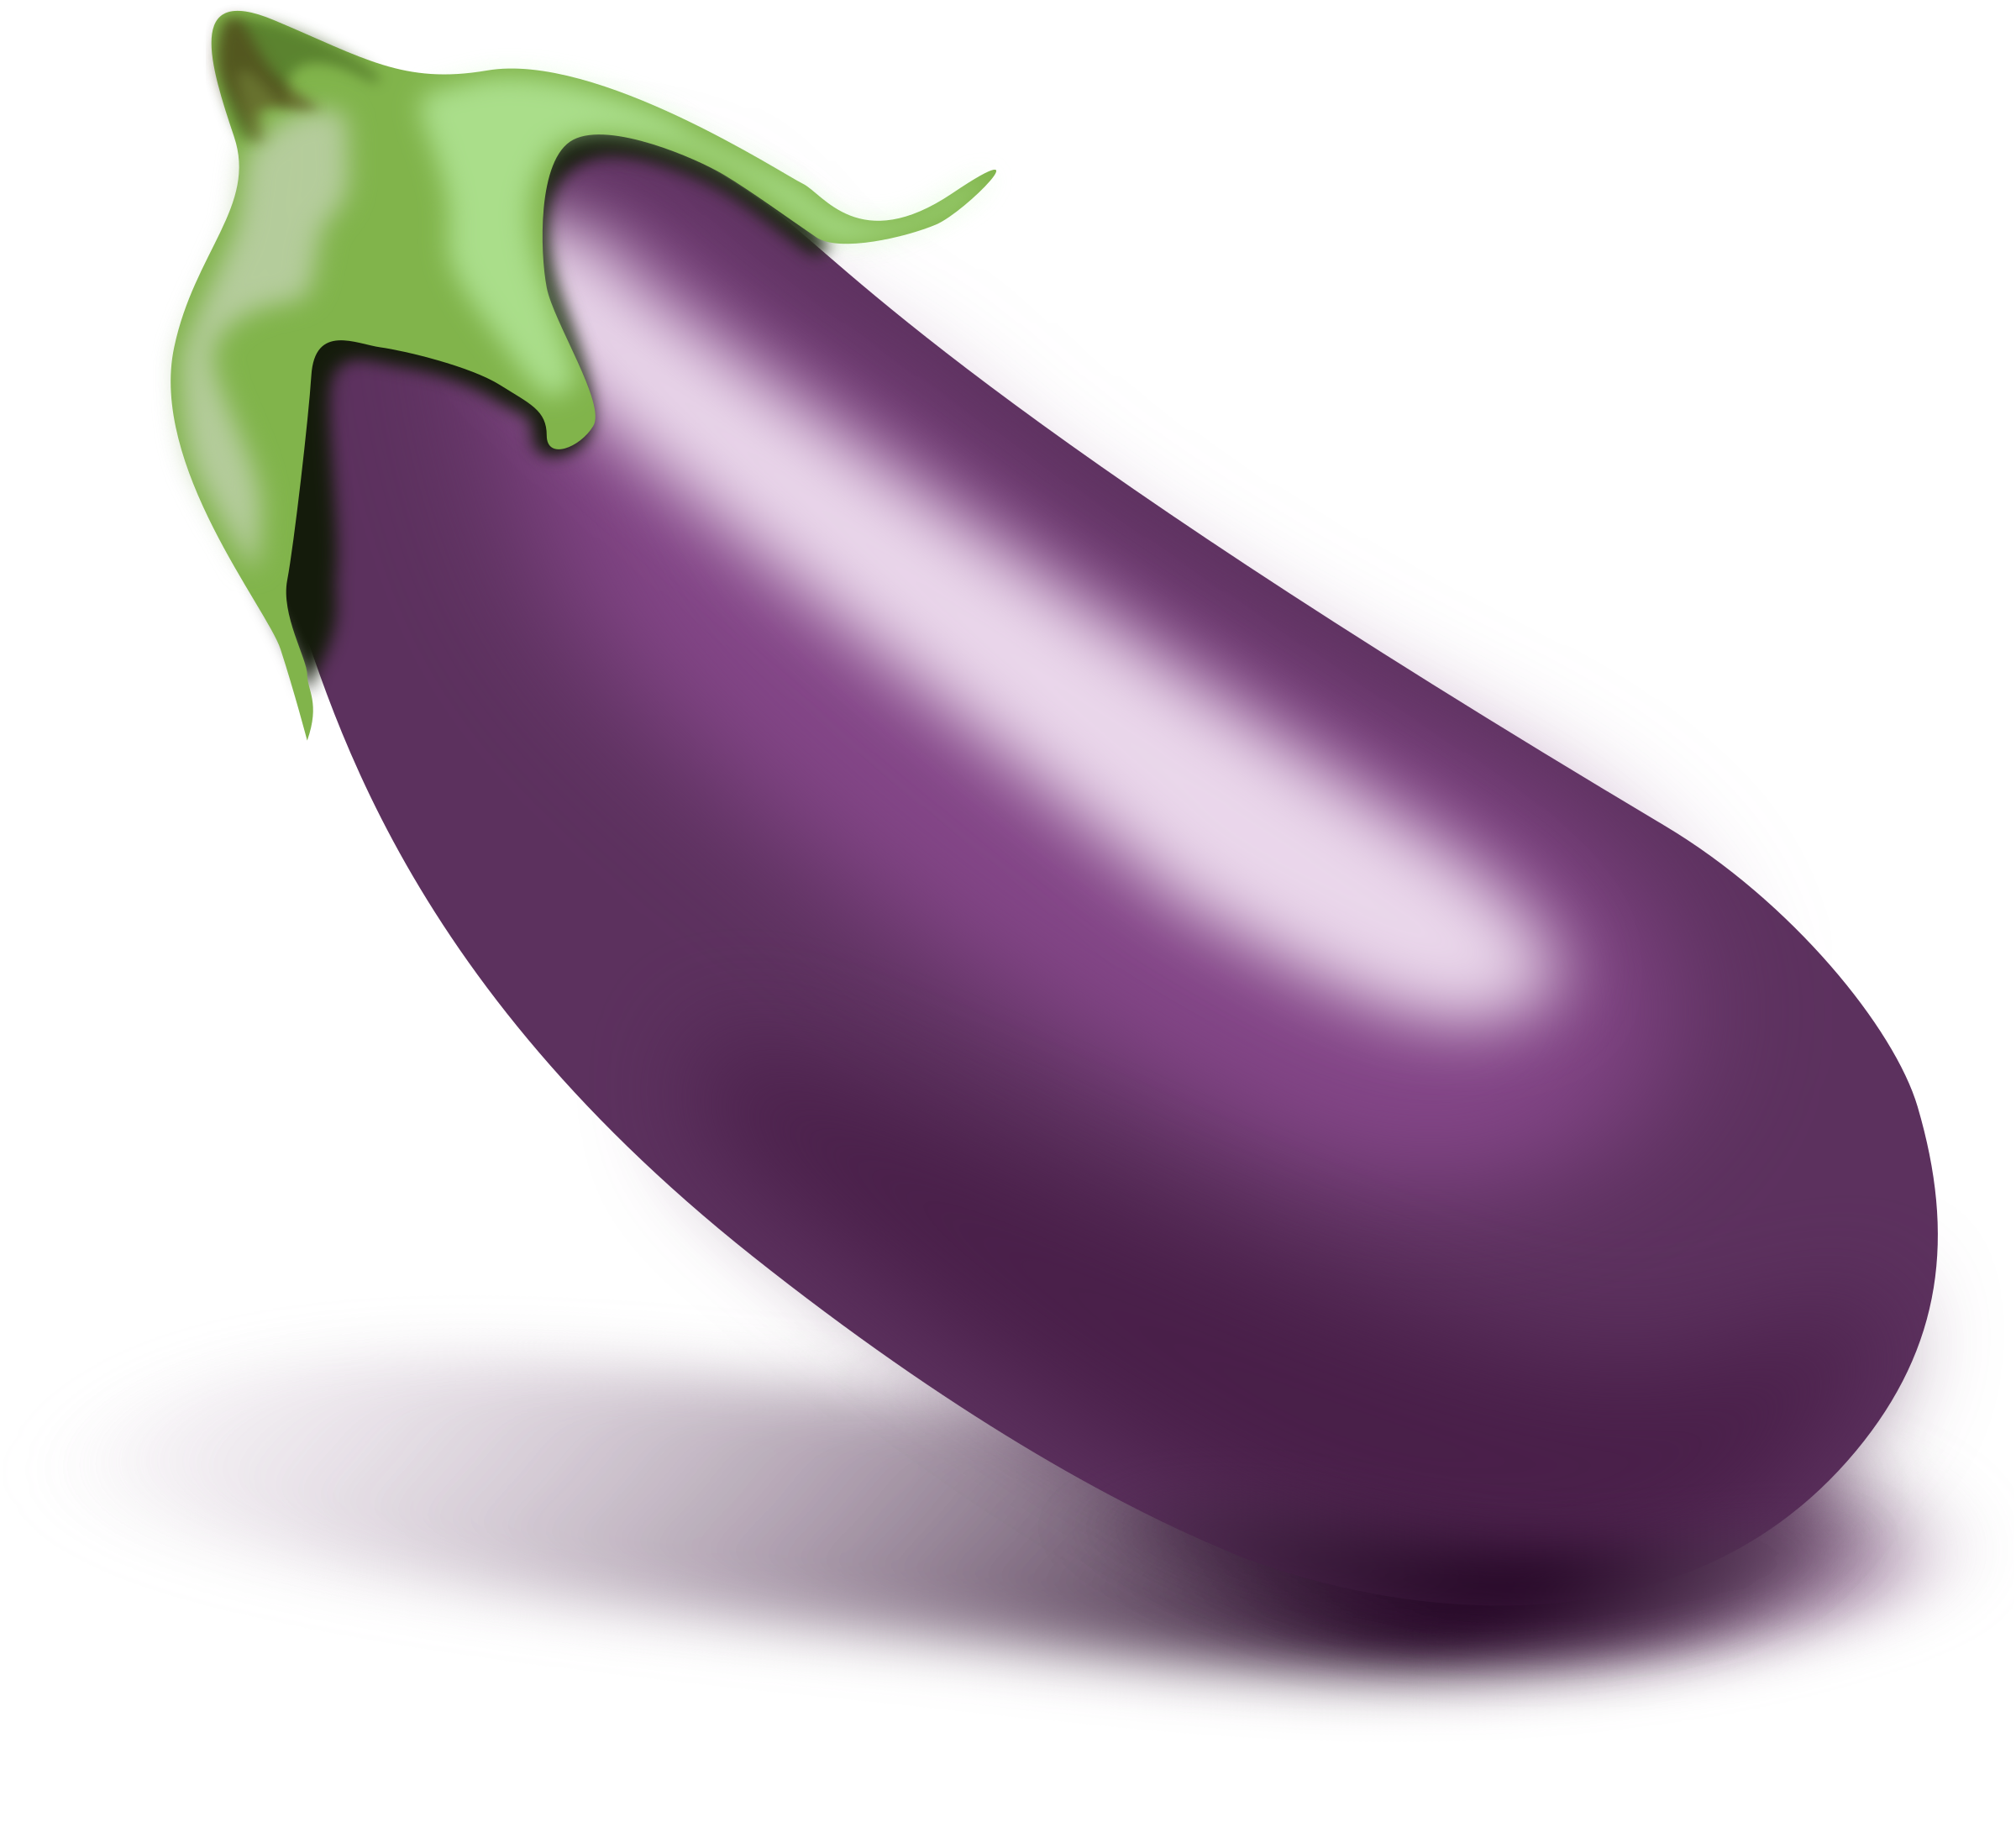 Clip art Openclipart Aubergines Image Free content